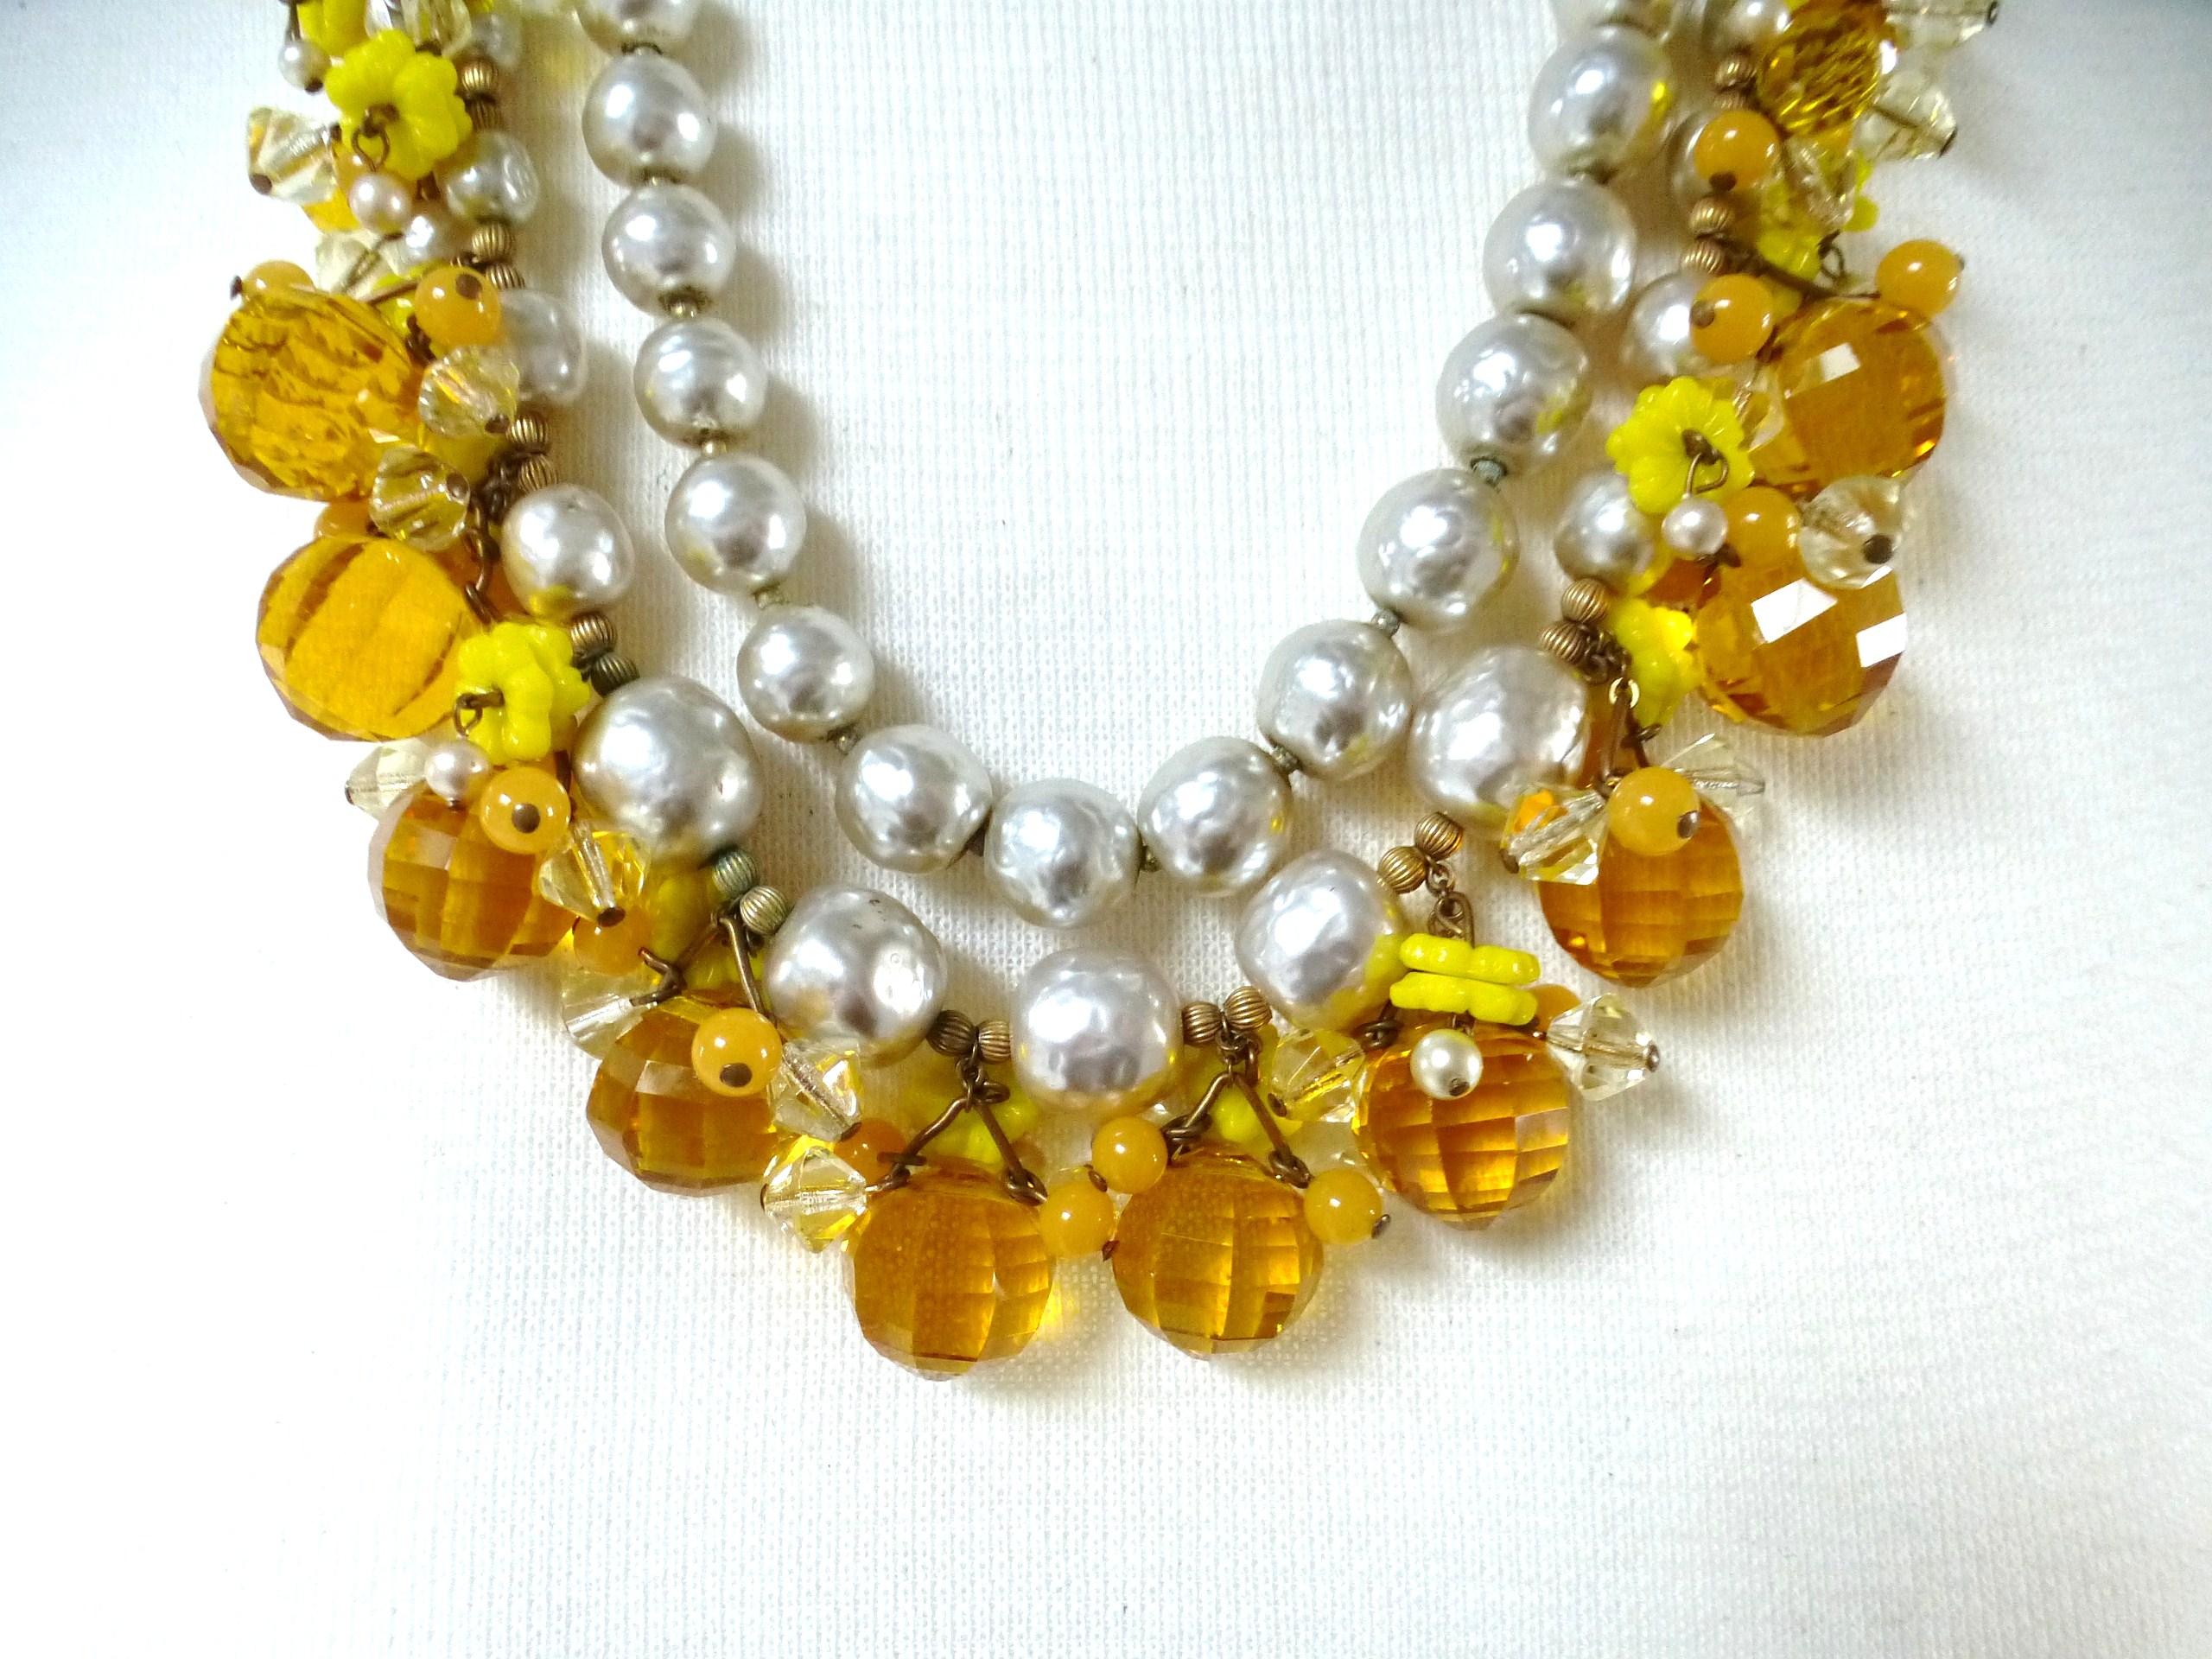 Artisan MIRIAM HASKELL necklace book piece 1950s with many cut yellow glass balls For Sale